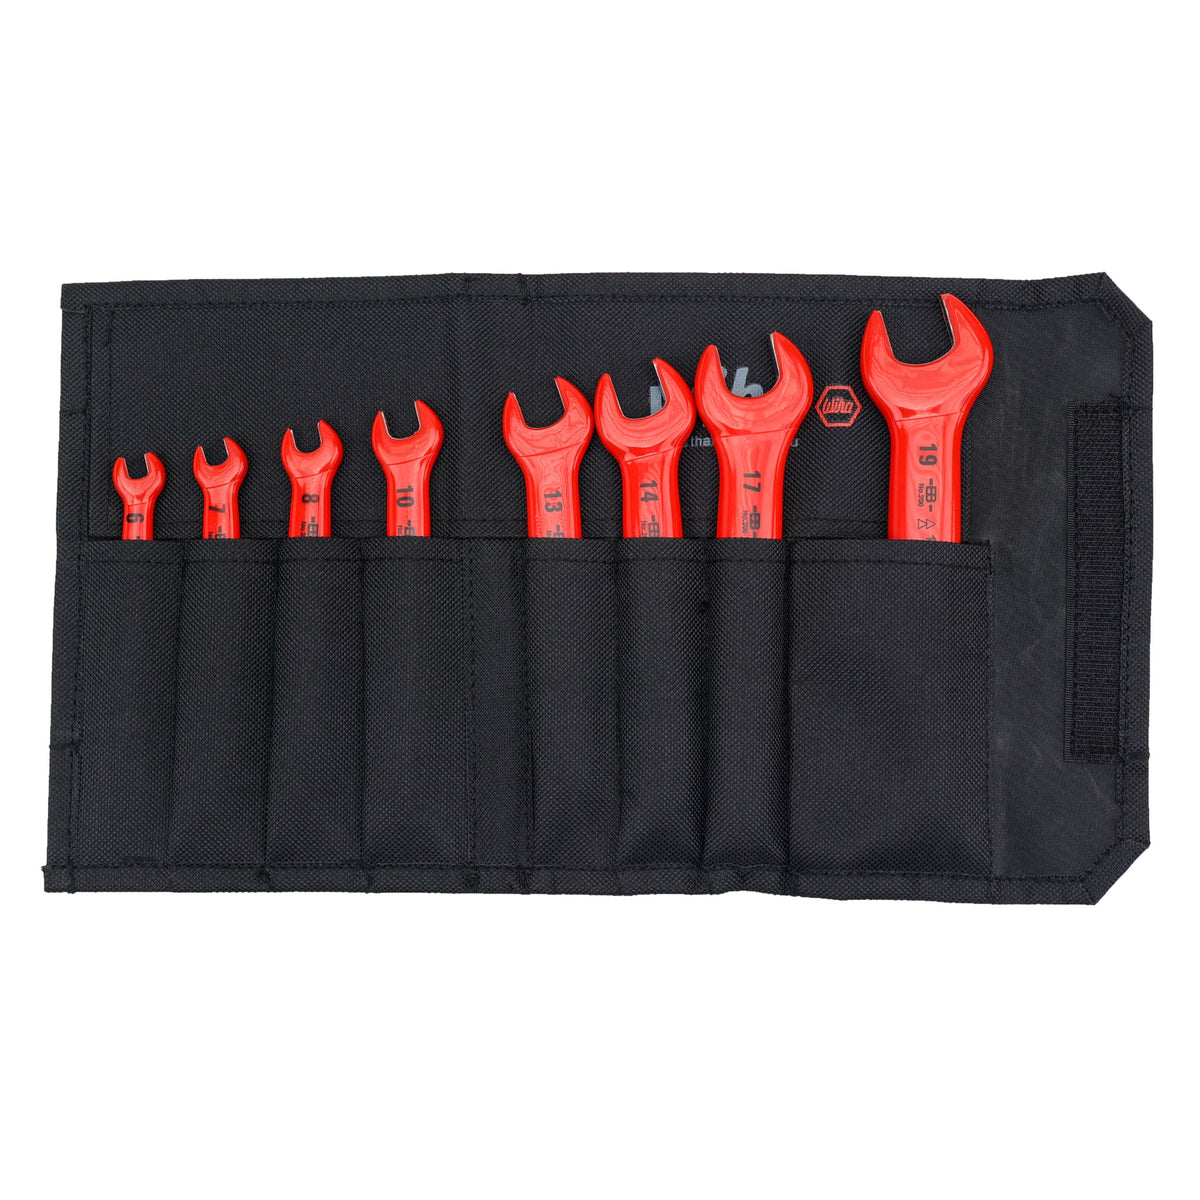 Wiha 20093 8 Piece Insulated Open End Wrench Set - Metric